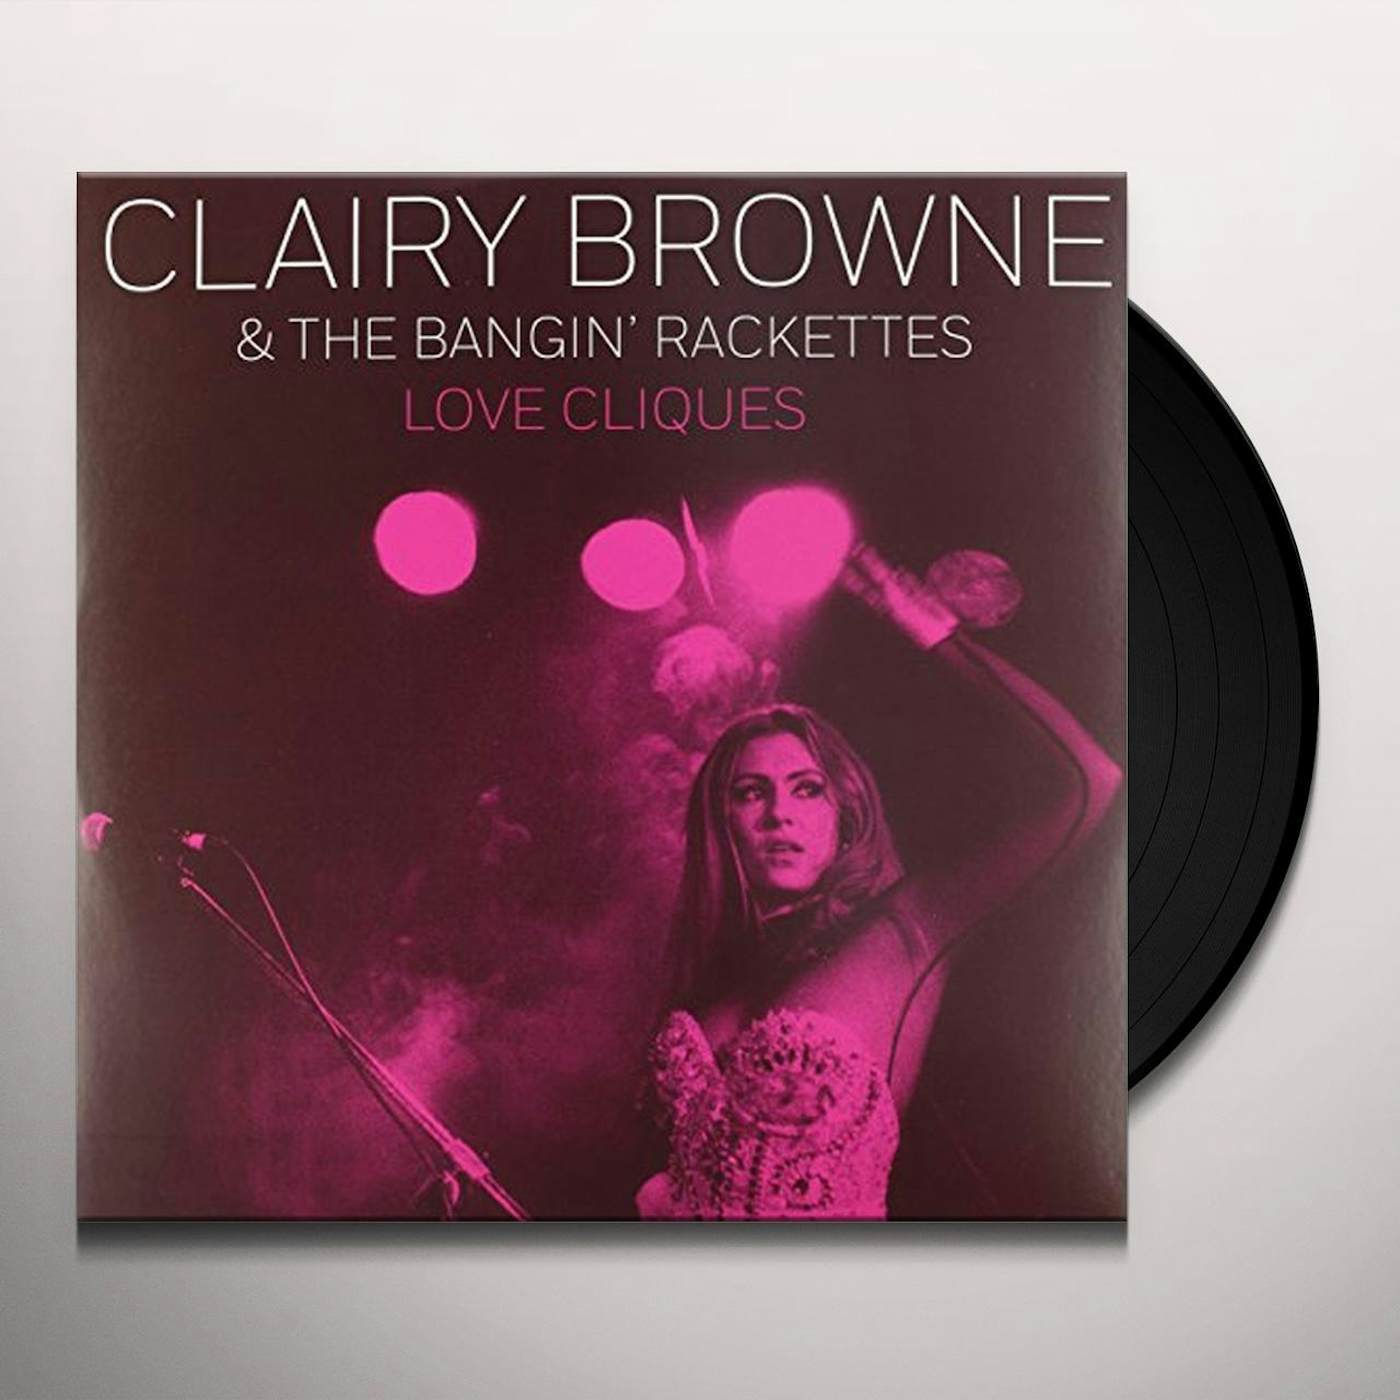 Clairy Browne & The Bangin' Rackettes Love Cliques Vinyl Record